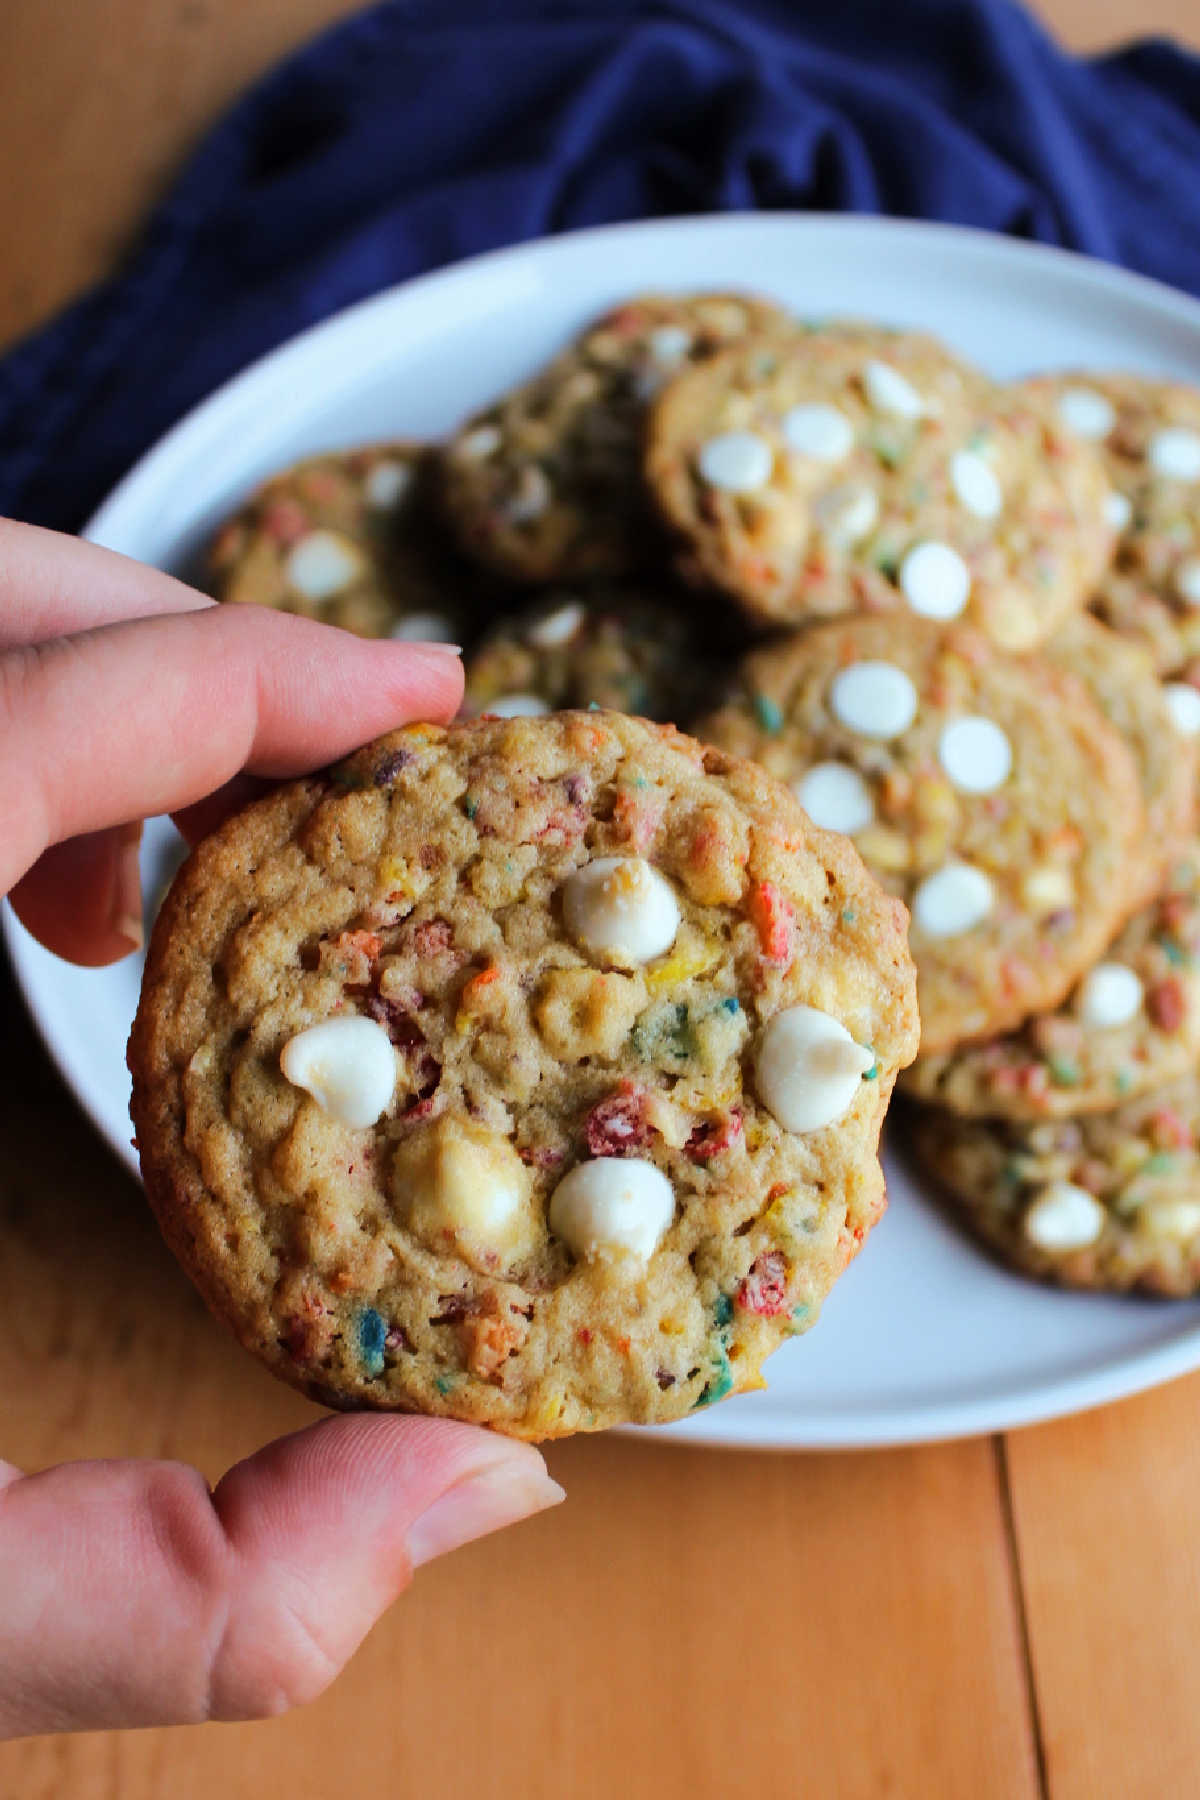 Hand holding fruity pebble cookie.